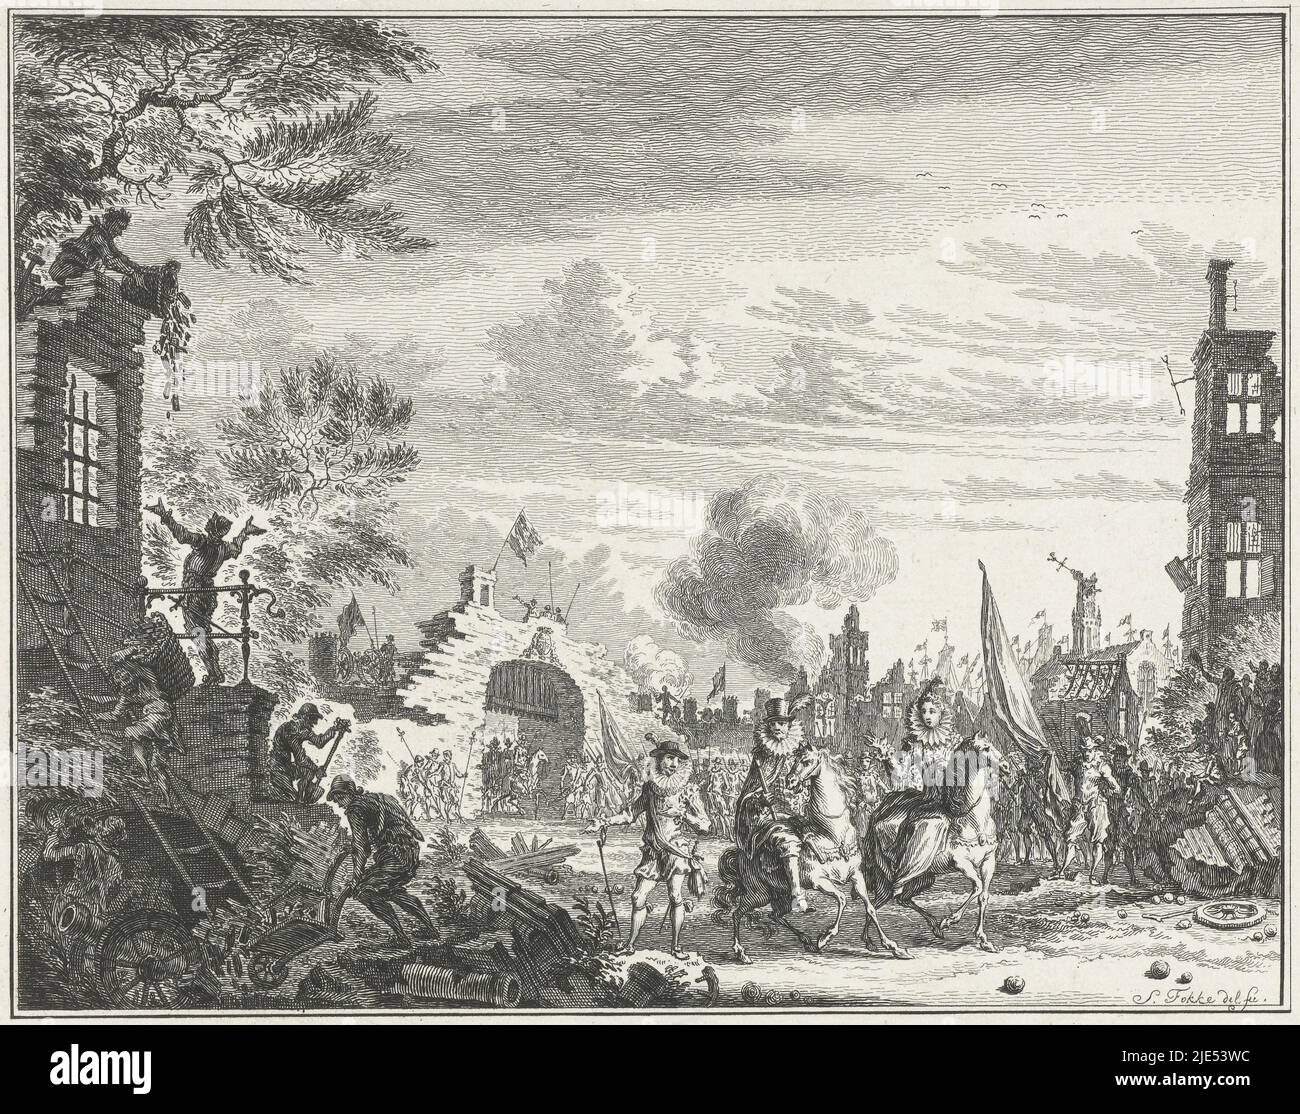 Archduke Albrecht and Isabella ride horses through the ruins of the ruined city of Ostend after the capitulation on 20 September 1604., Albrecht and Isabella visit the ruined city of Ostend, 1604., print maker: Simon Fokke, (mentioned on object), Simon Fokke, (mentioned on object), Northern Netherlands, 1747 - 1759, paper, etching, h 167 mm × w 205 mm Stock Photo